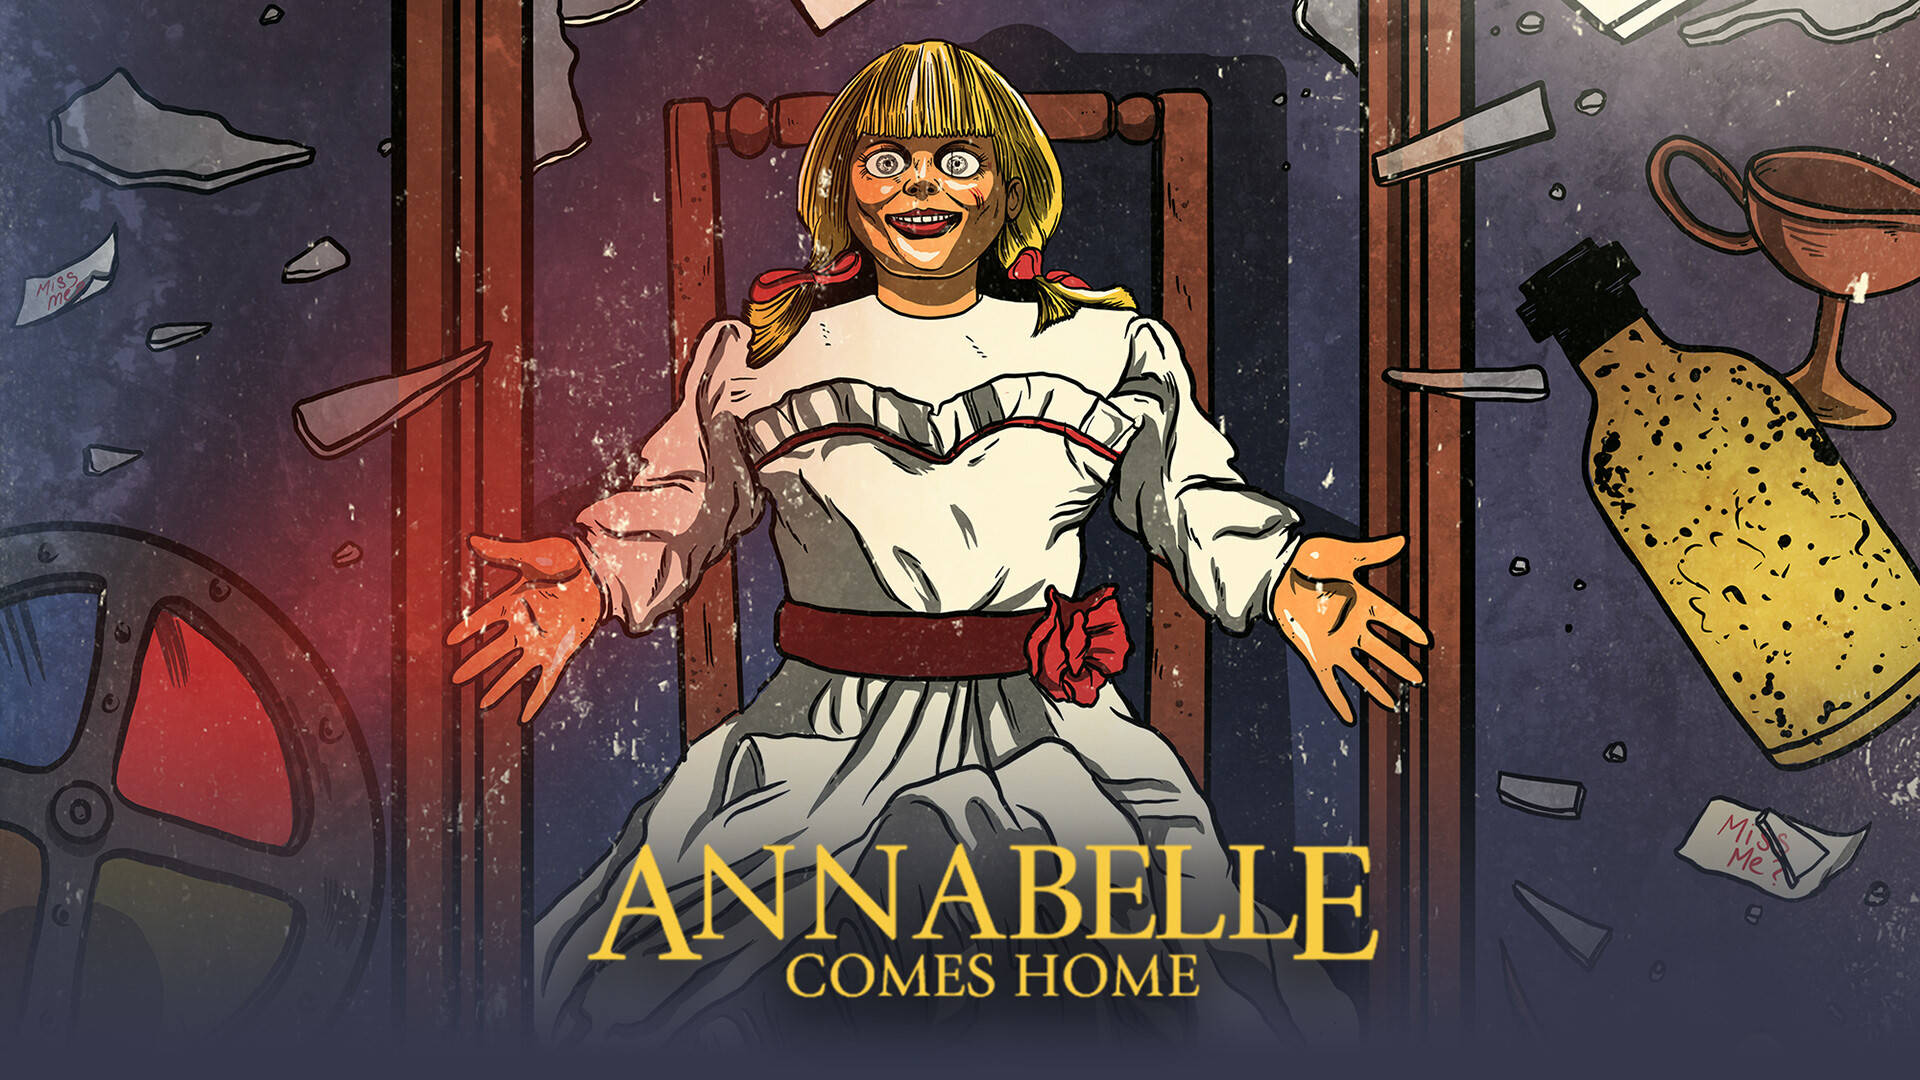 Frightening Adventure In Annabelle Comes Home Cartoon Poster